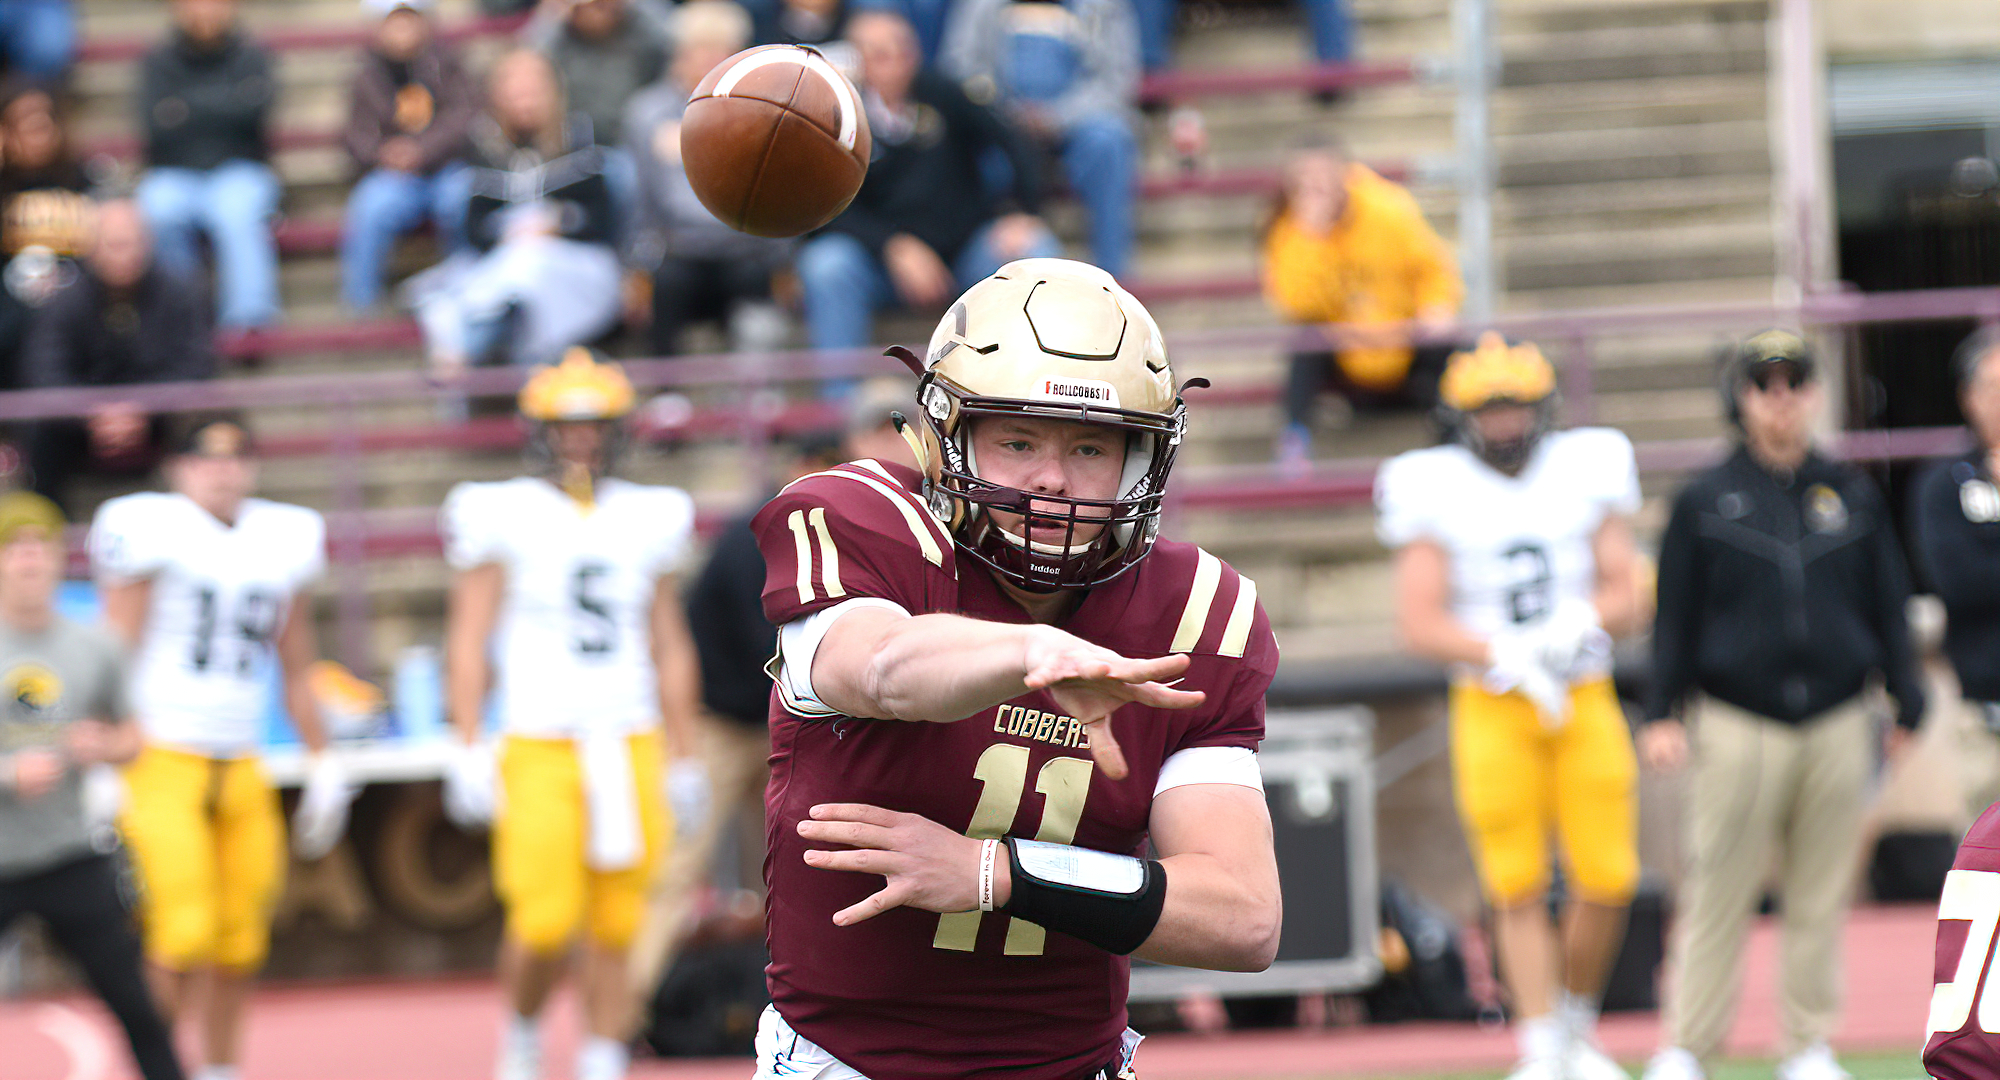 Cooper Mattern threw for 320 yards in the Cobbers' game at Augsburg. He attempted a school-record 58 passes and completed 35 throws.